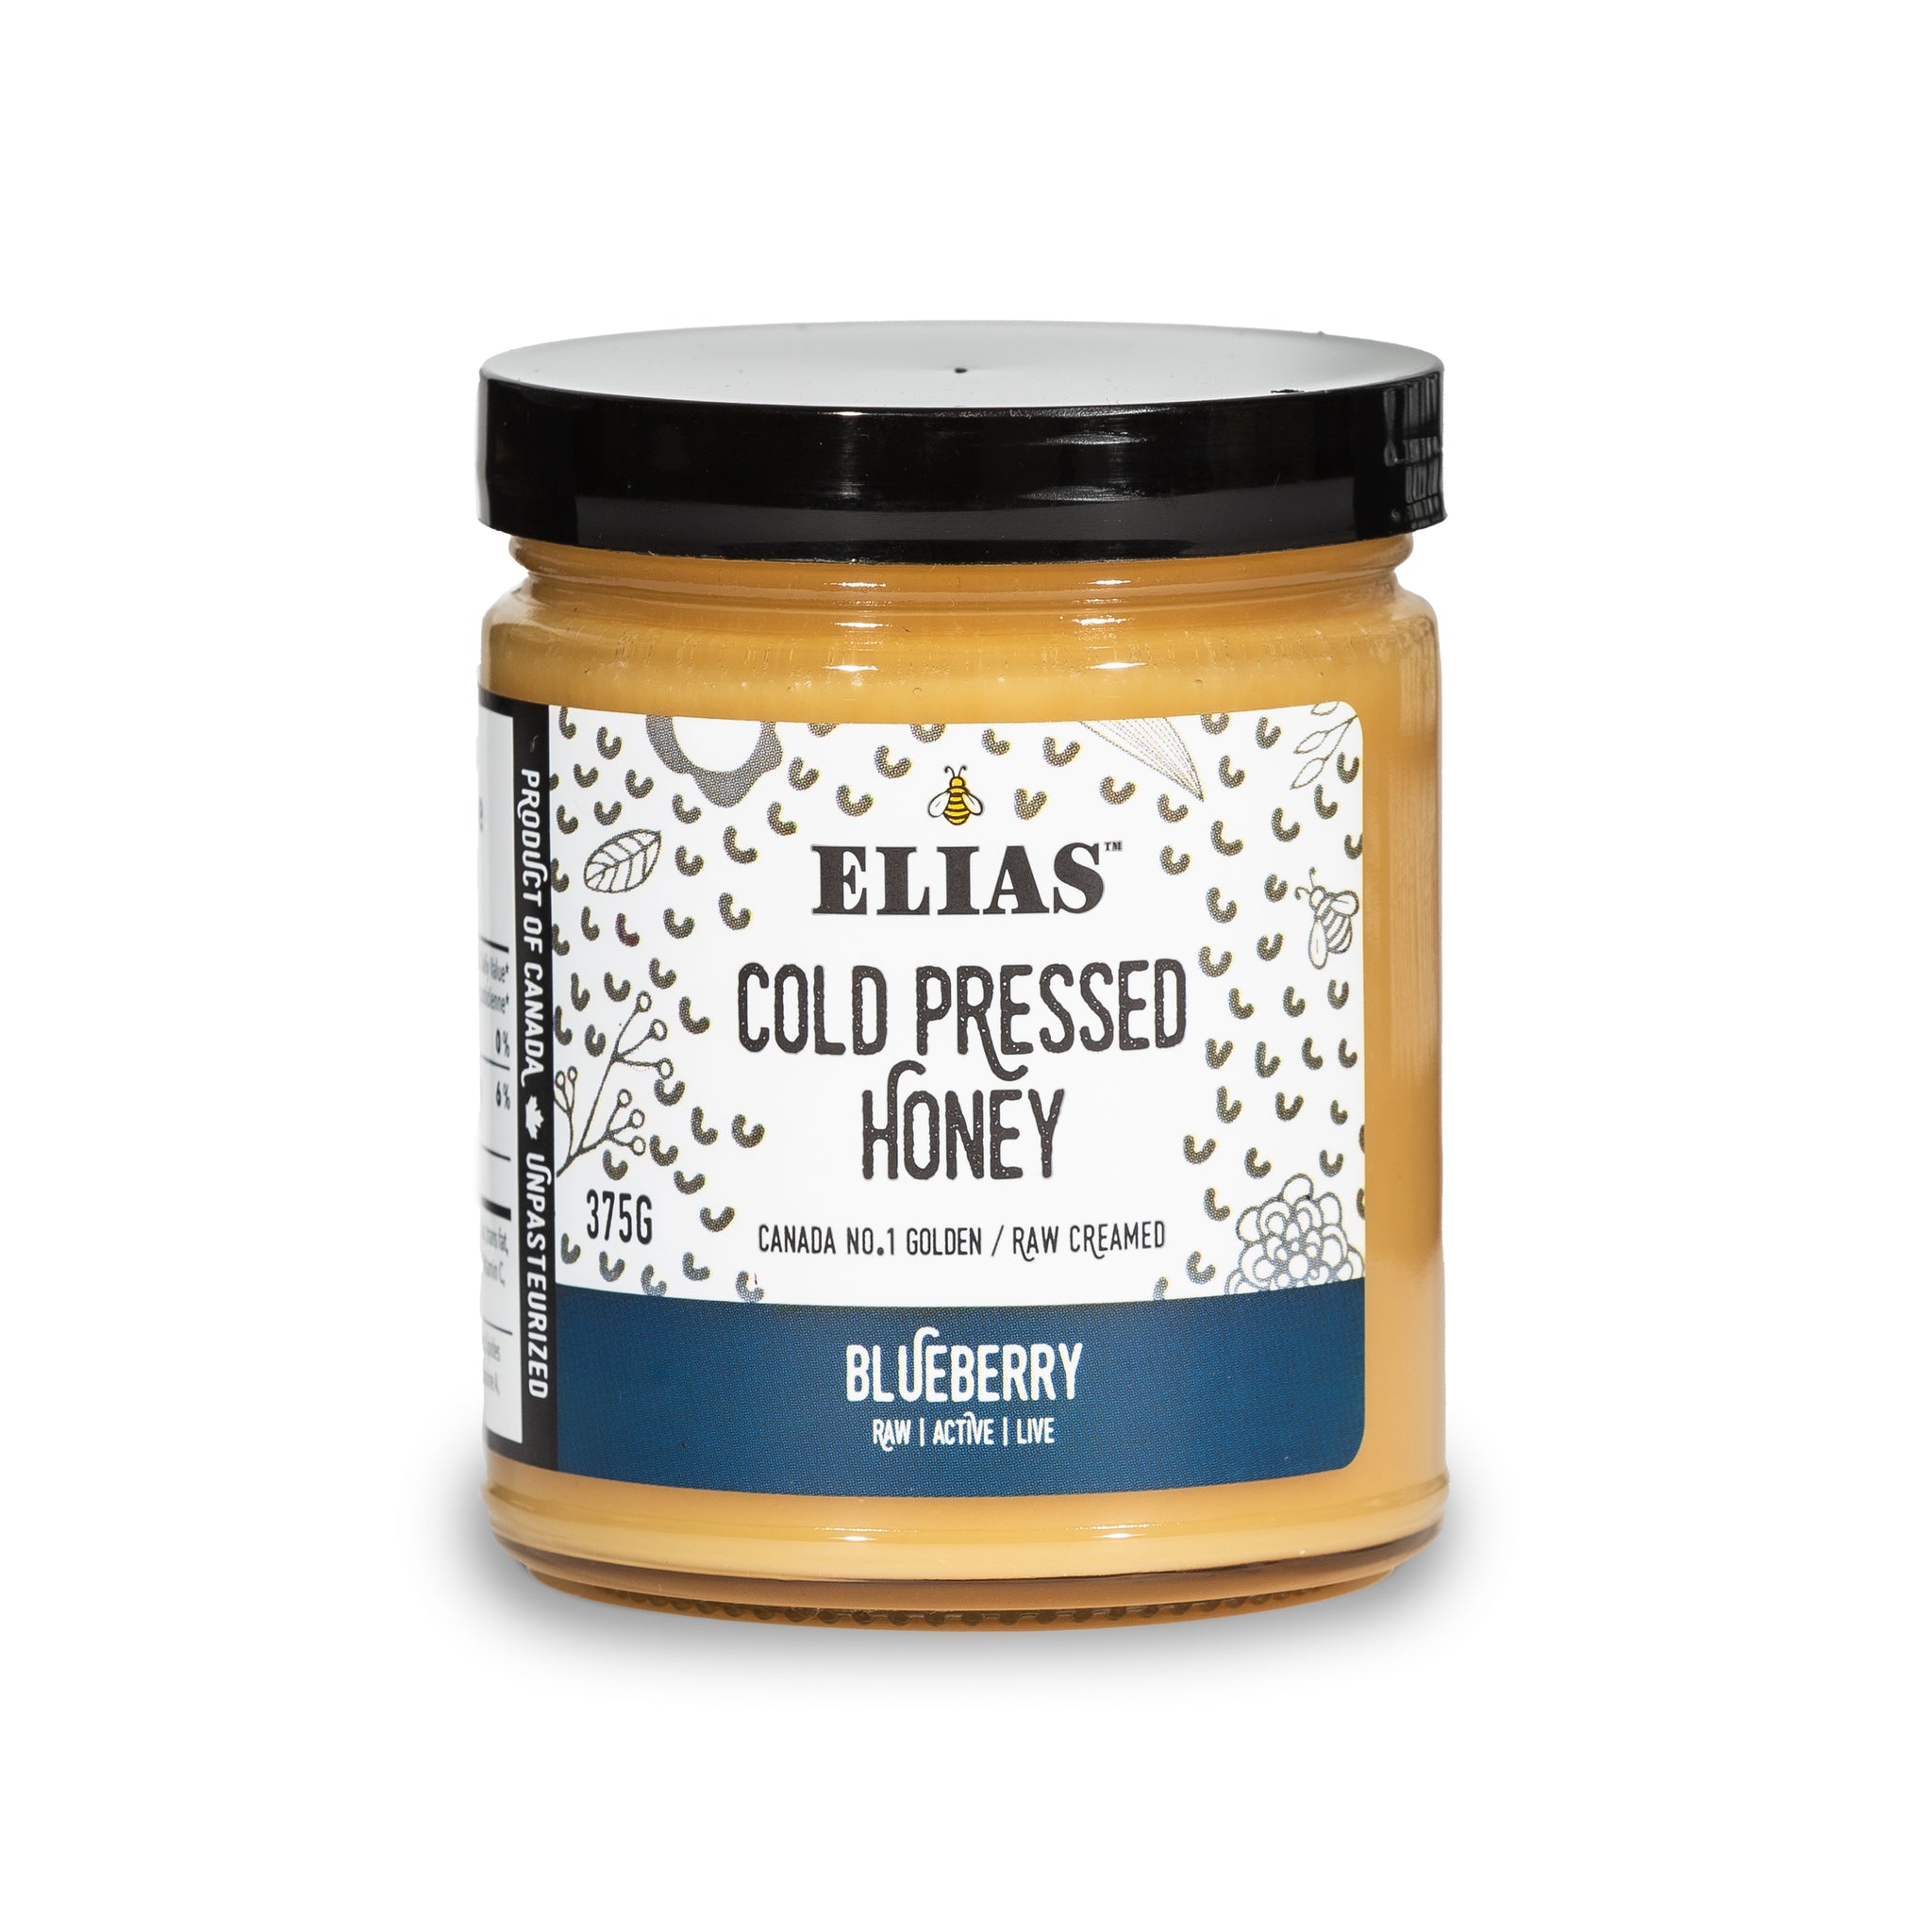 Buy Elias Canadian Blueberry Cold Pressed Honey in 375g Jar.